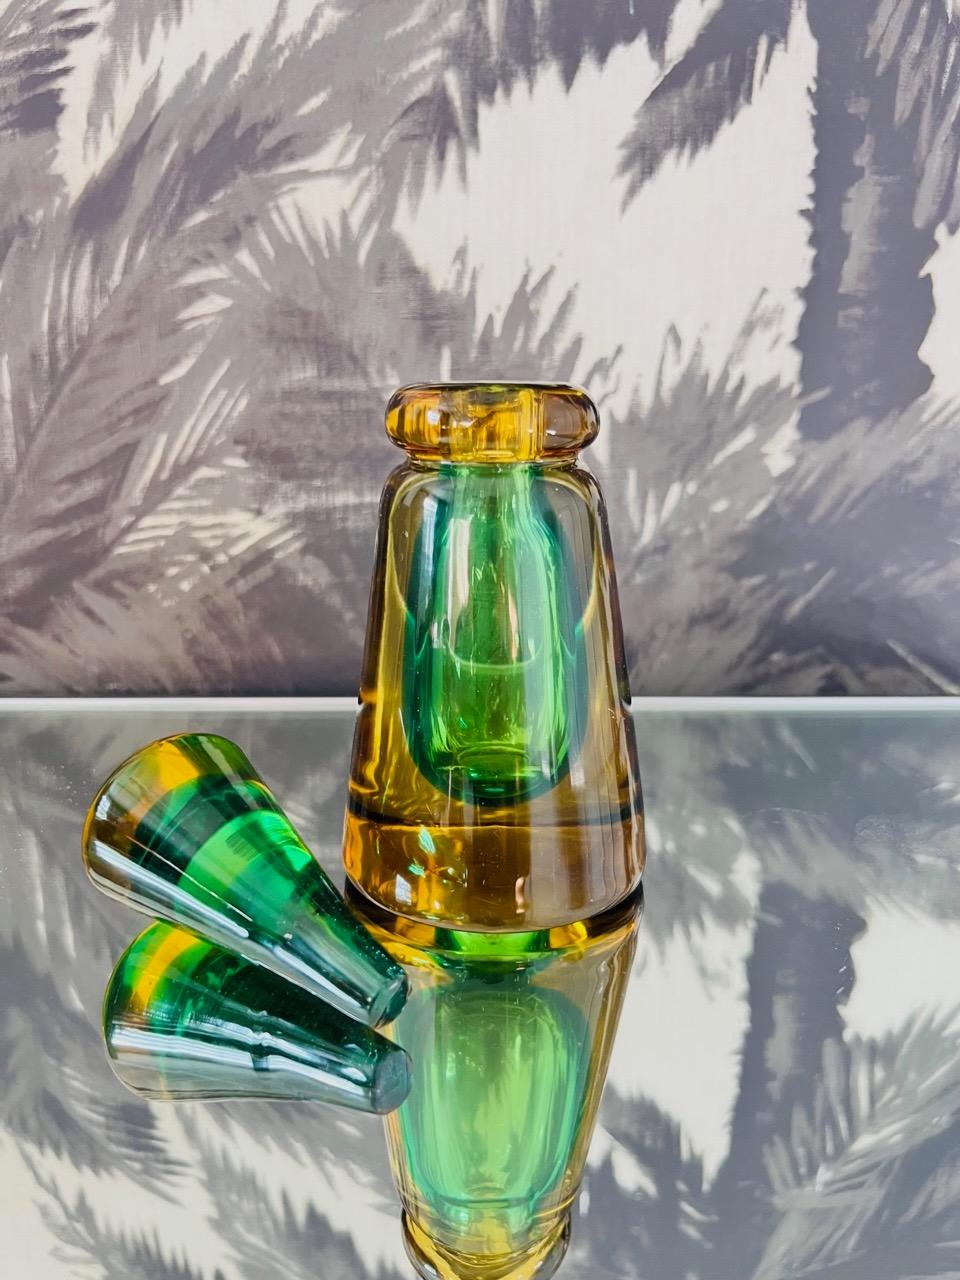 Hand-Crafted Green and Yellow Murano Glass Bottle Designed by Flavio Poli, c. 1960